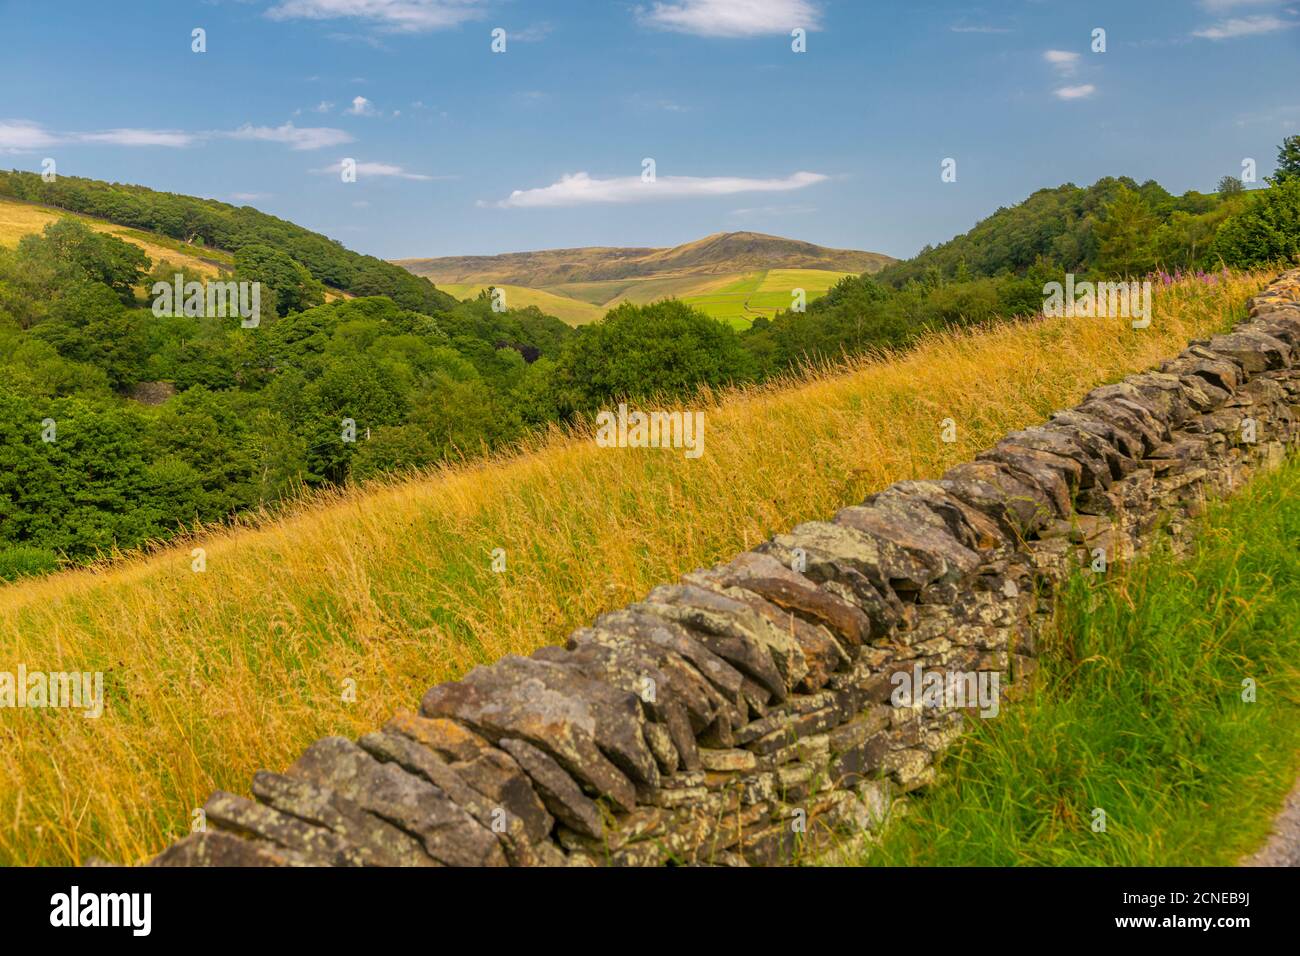 View of dry stone walls, woodland and hills surrounding Hayfield, High Peak, Derbyshire, England, United Kingdom, Europe Stock Photo